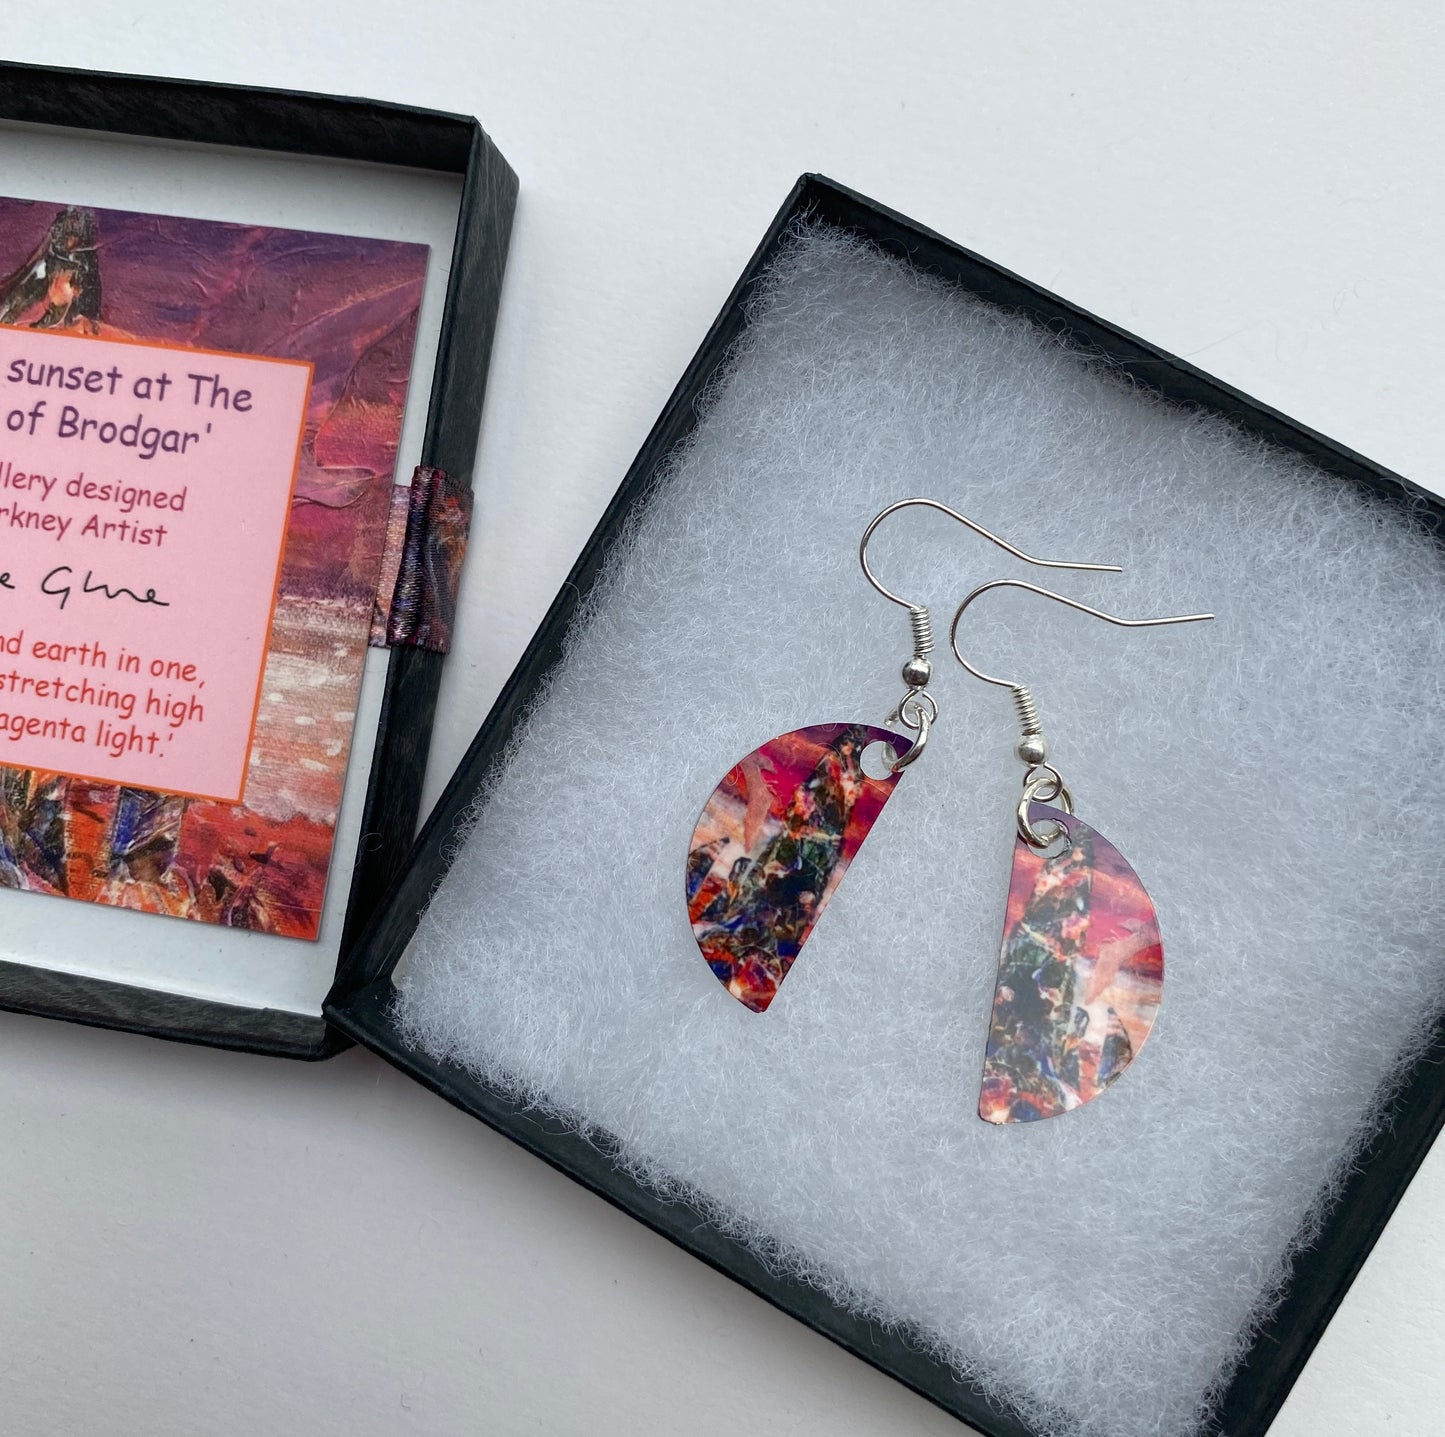 A pair of earrings, Wild sunset at The Ring of Brodgar, by Orkney artist Jane Glue, Scotland